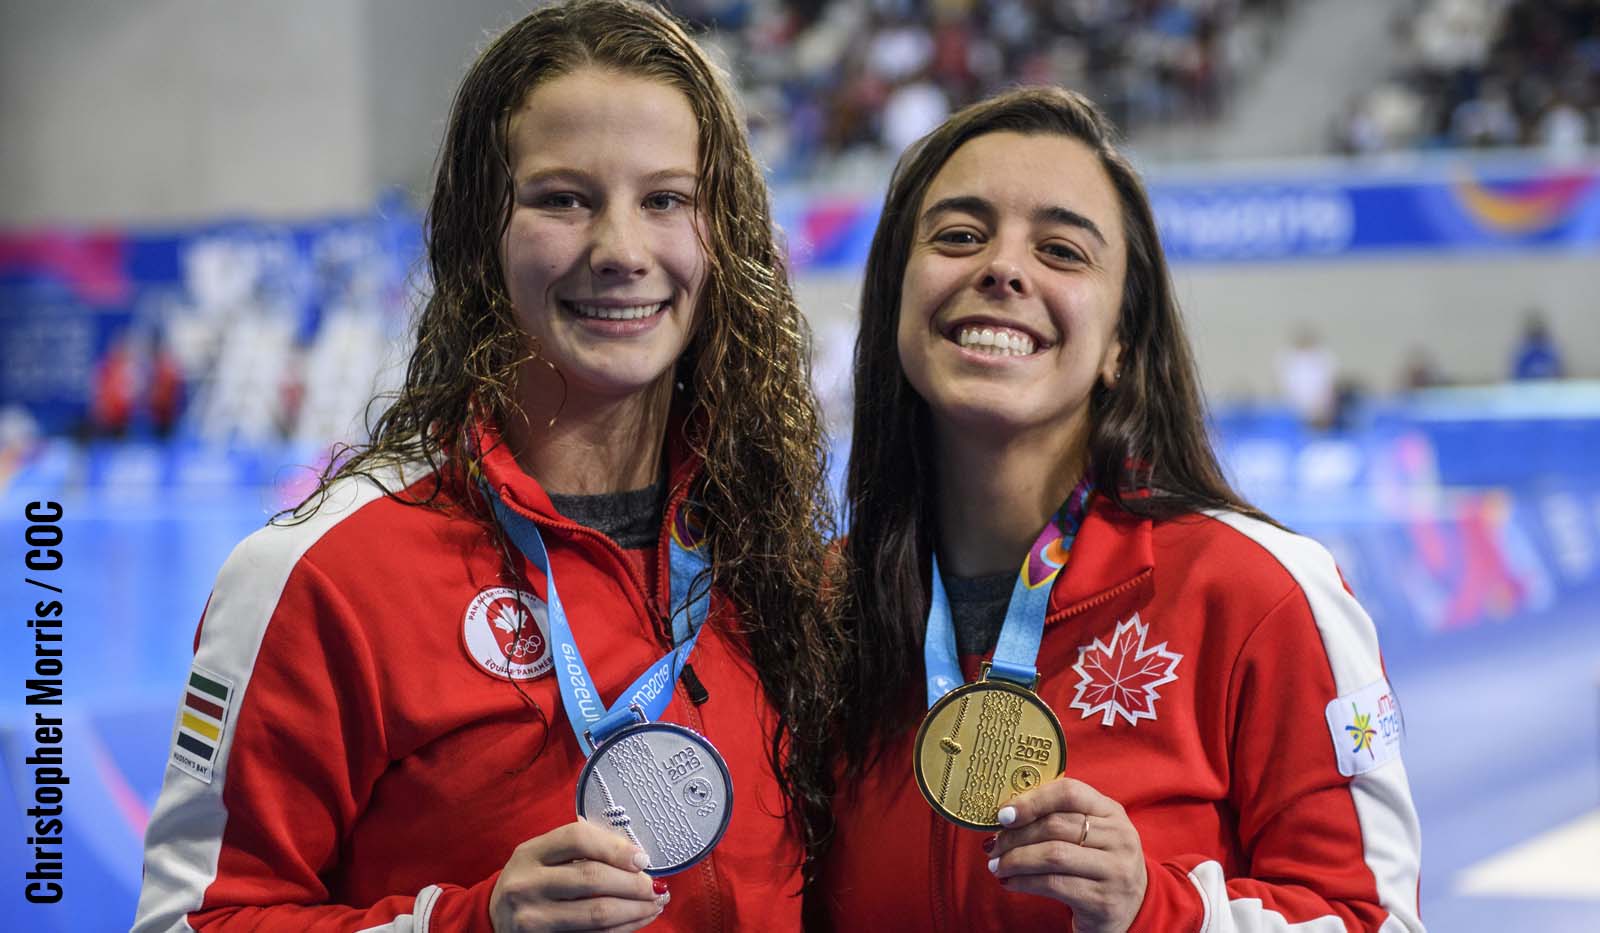 Lima: Canada wins three medals on Day 3